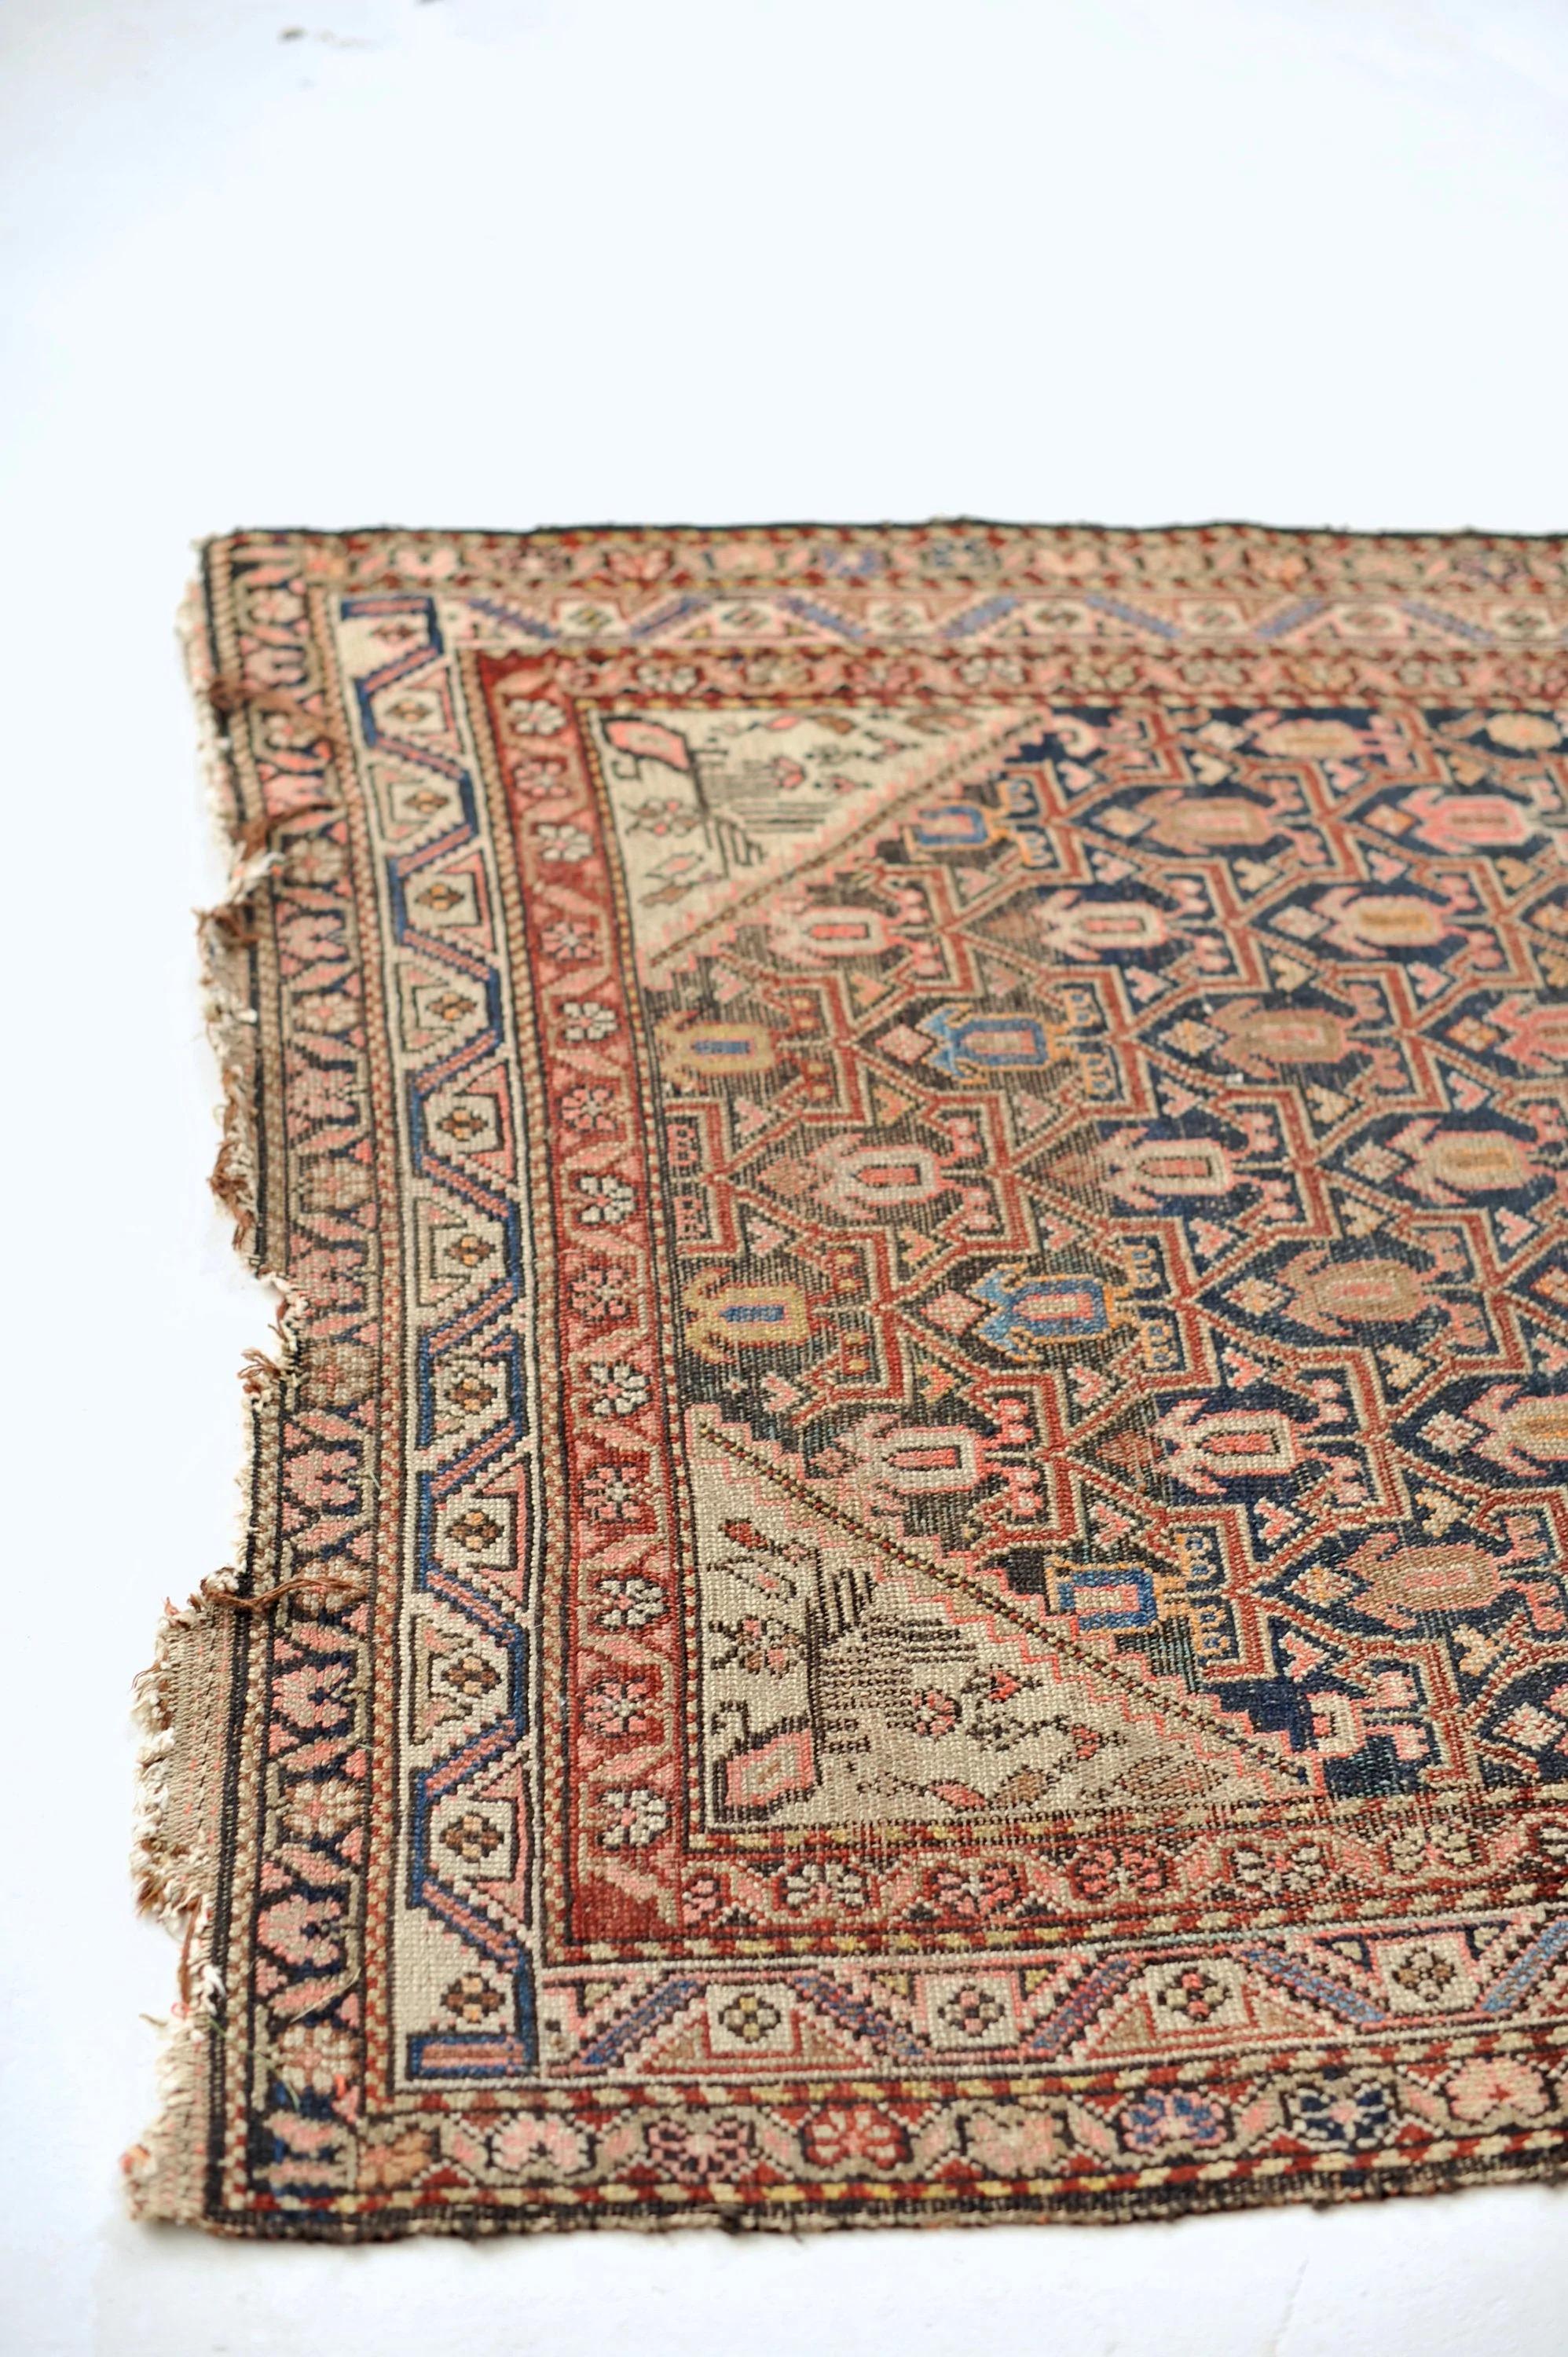 Distressed Antique Persian Malayer

Size: 3.8 x 6.8
Age: Antique
Pile: Low with patina and age-related wear

This rug is one-of-a-kind, only one in the world, no others are available.

Because of the nature and age of these older/antique handmade